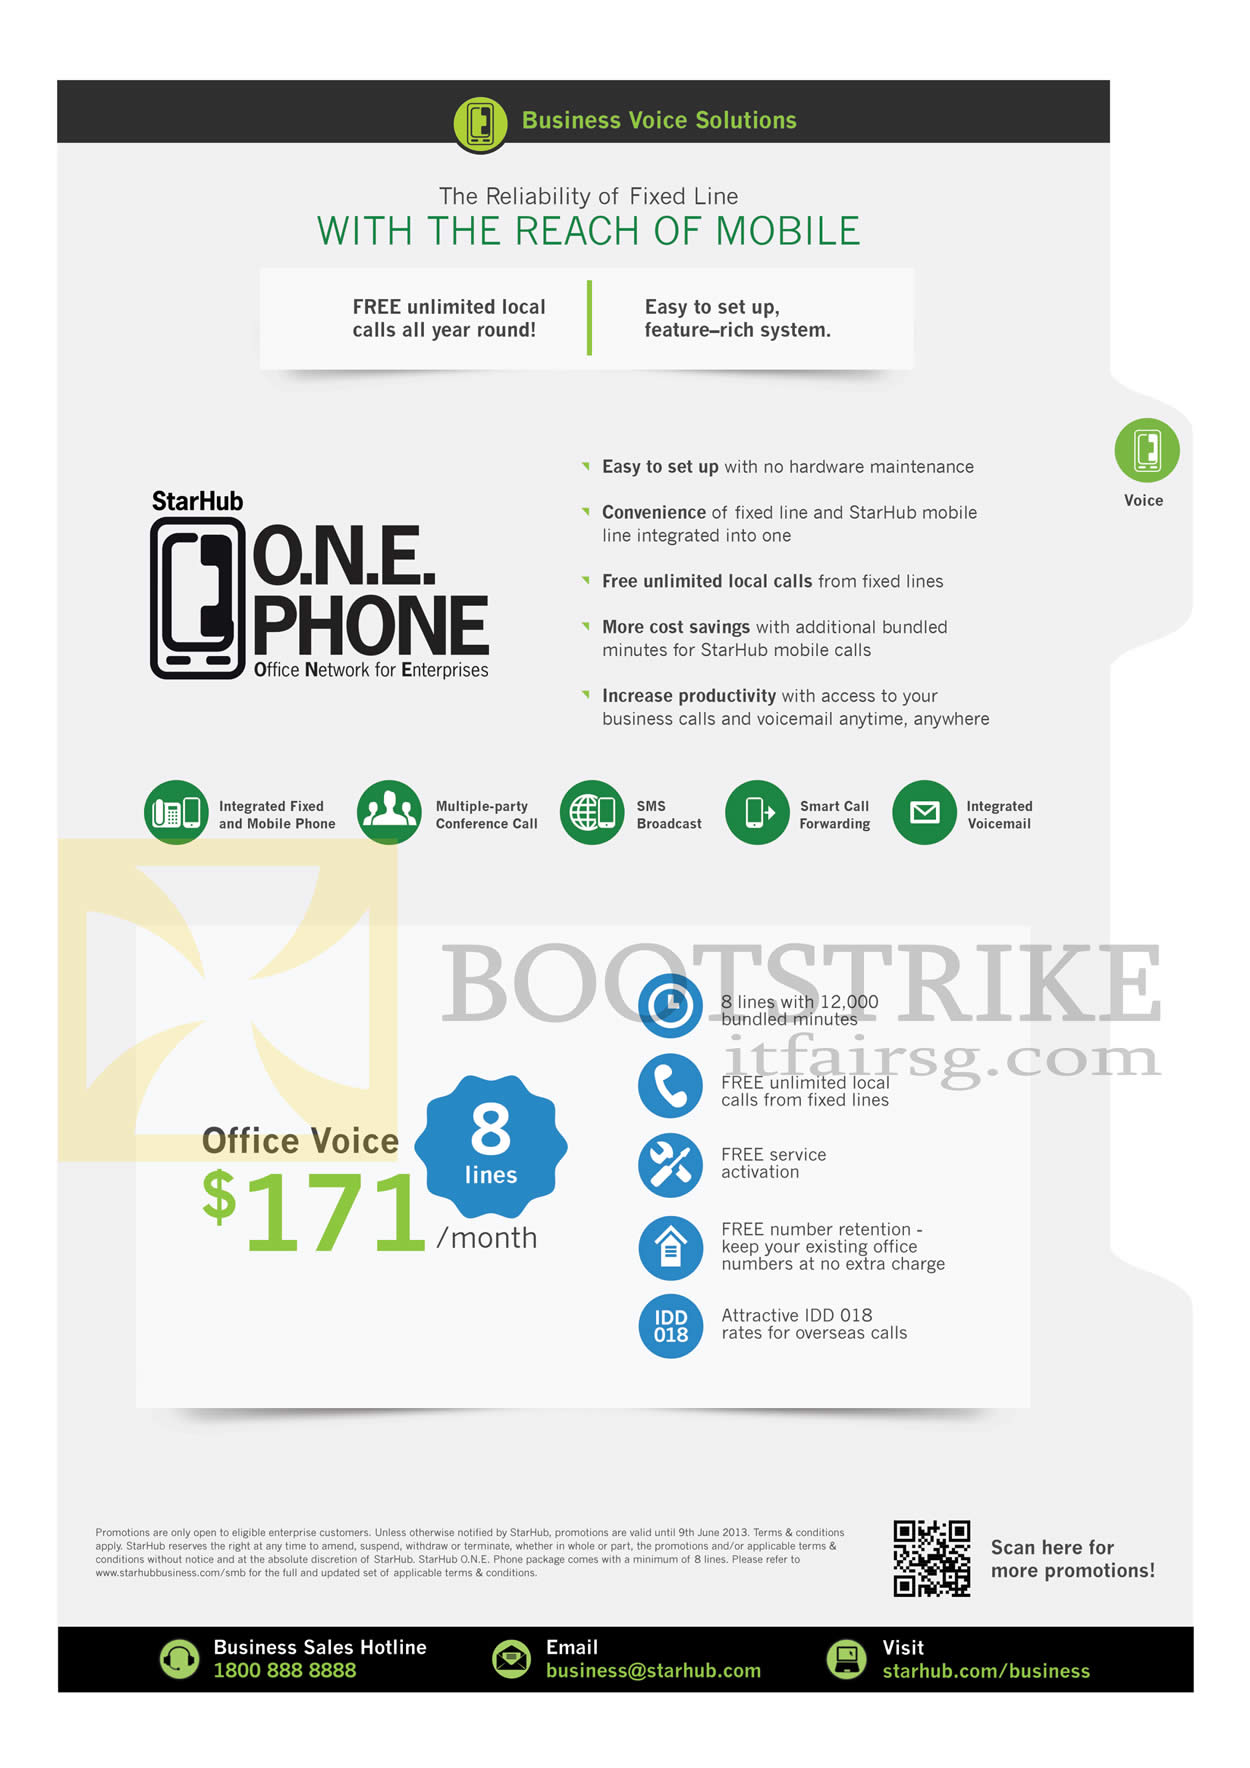 PC SHOW 2013 price list image brochure of Starhub Business Voice Solutions, One Phone, Office Voice